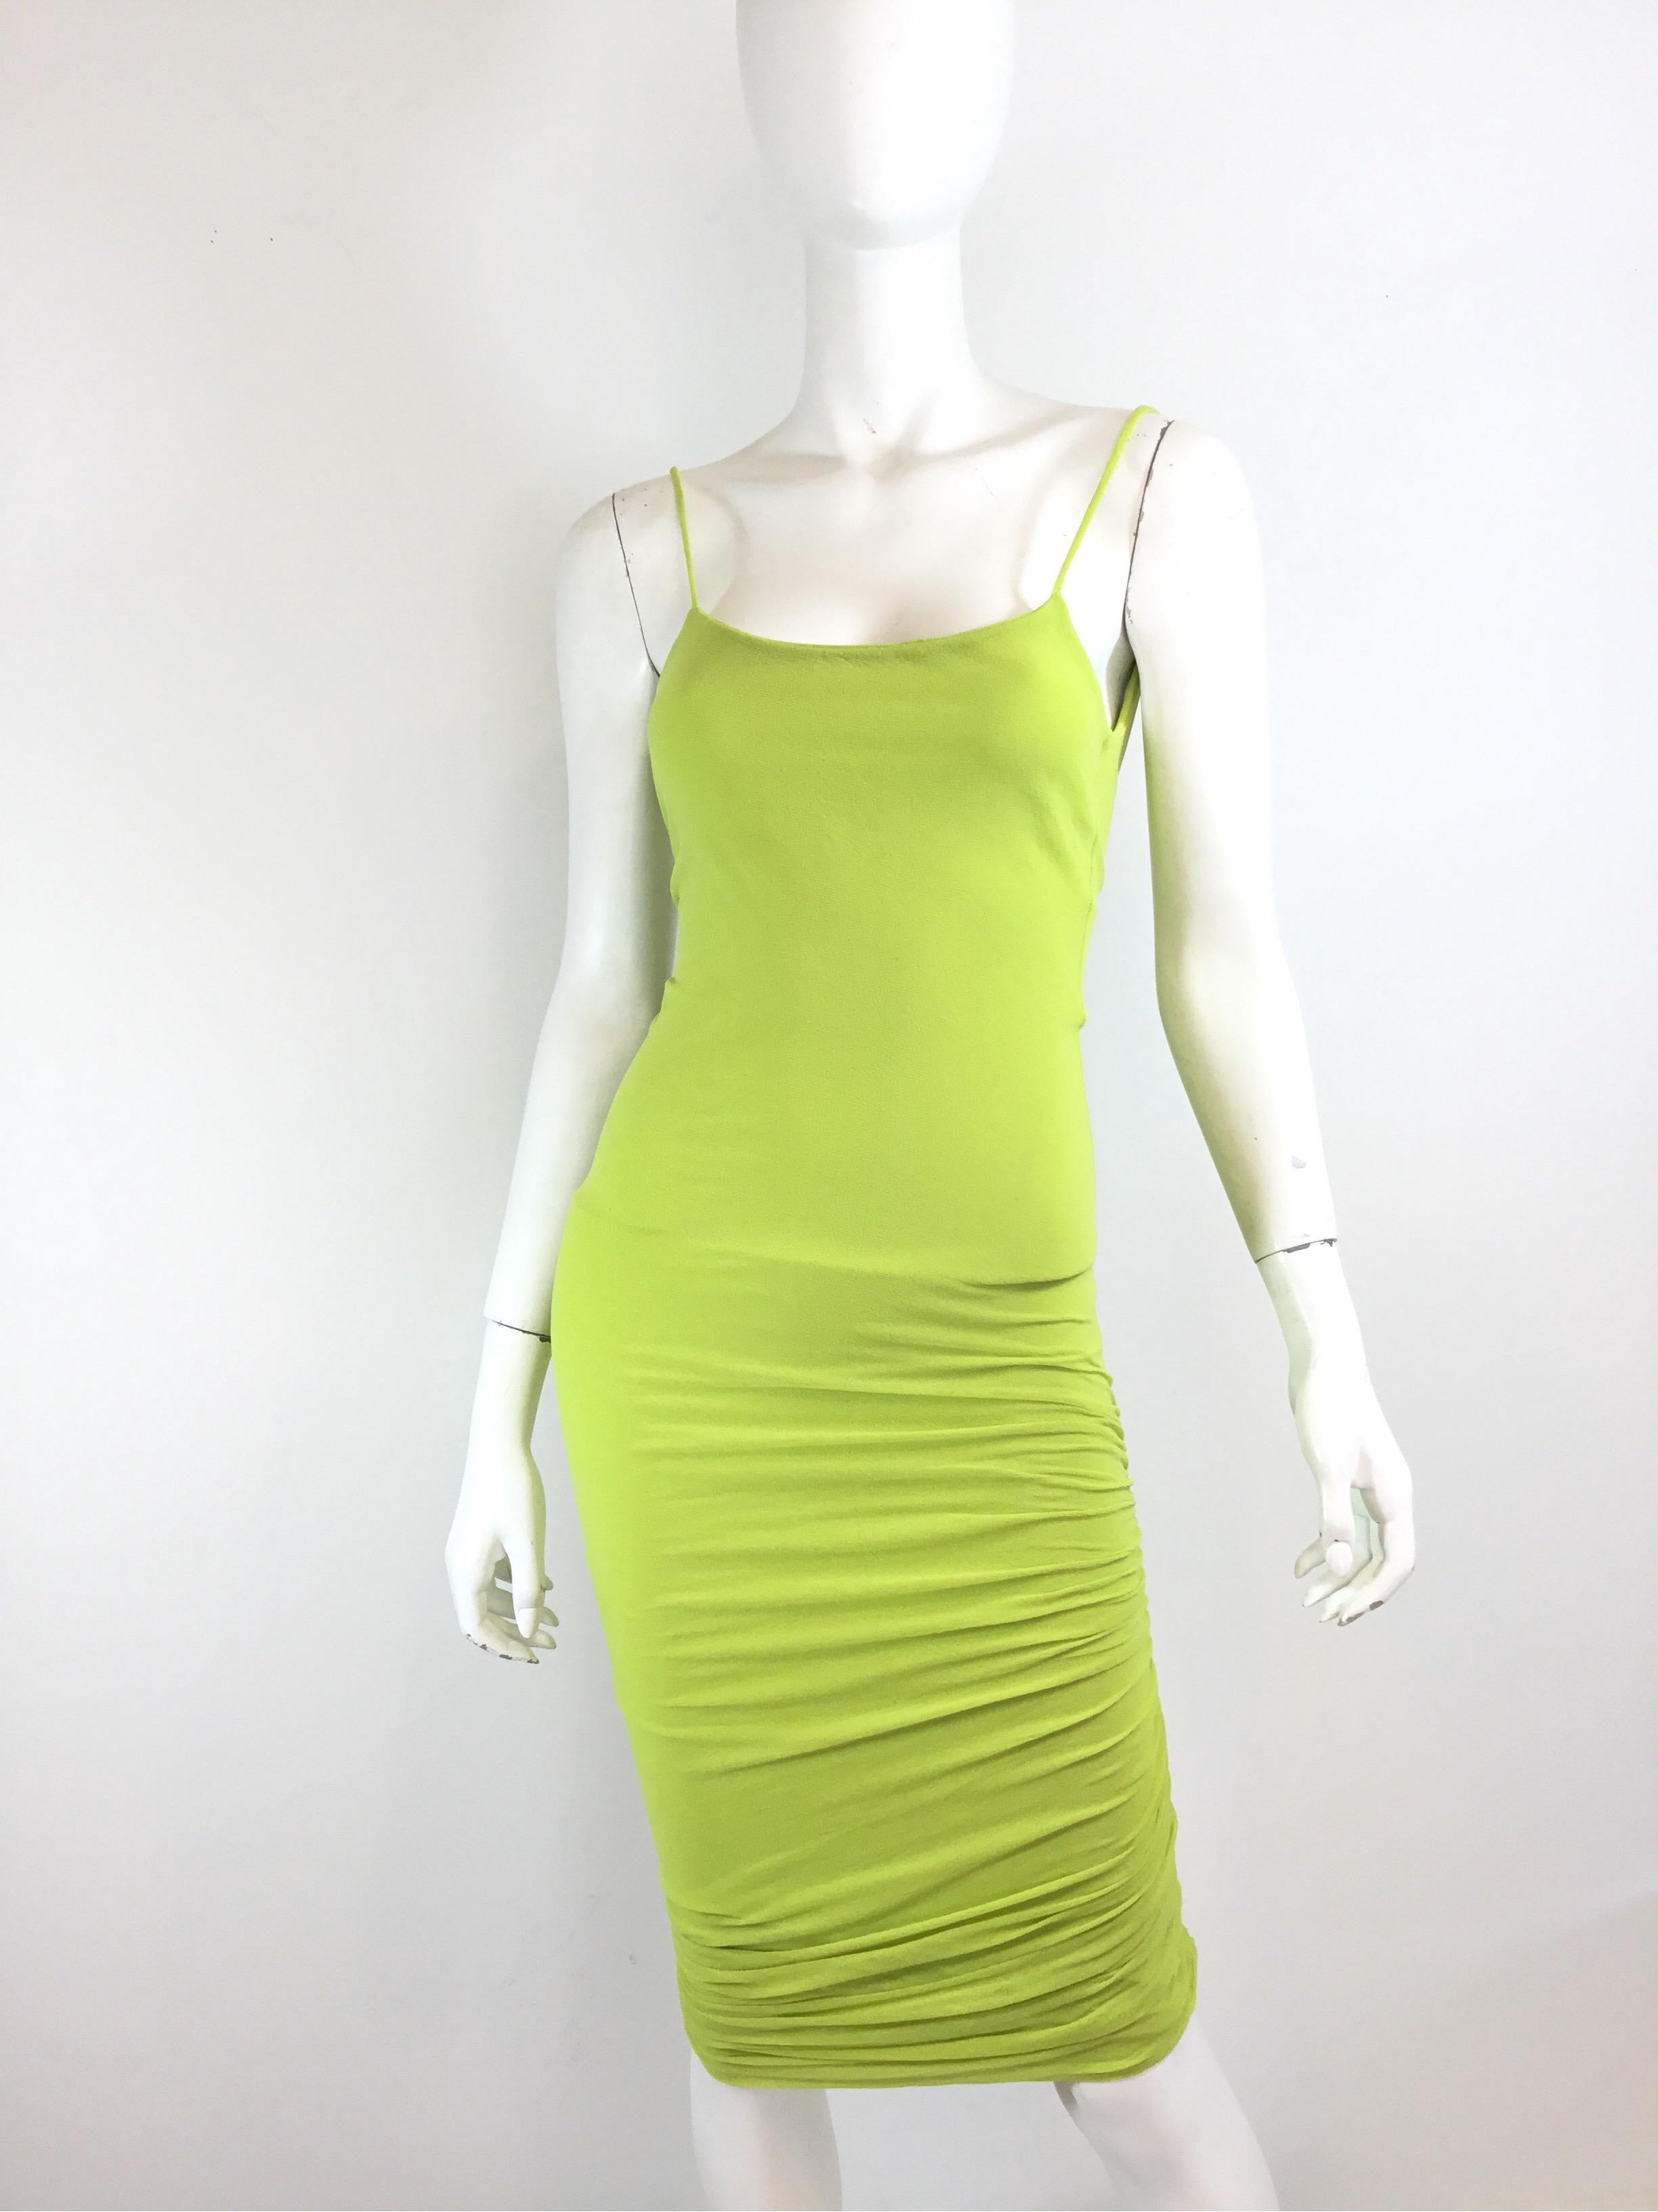 Giorgio di Sant Angelo dress featured in a bright green color, stocking knit fabric which gives the dress a fitted and ruched design. Fully lined. Dress is small with some stretch to the fabric. Measurements are as follows:

Bust 26”, waist24”, hips